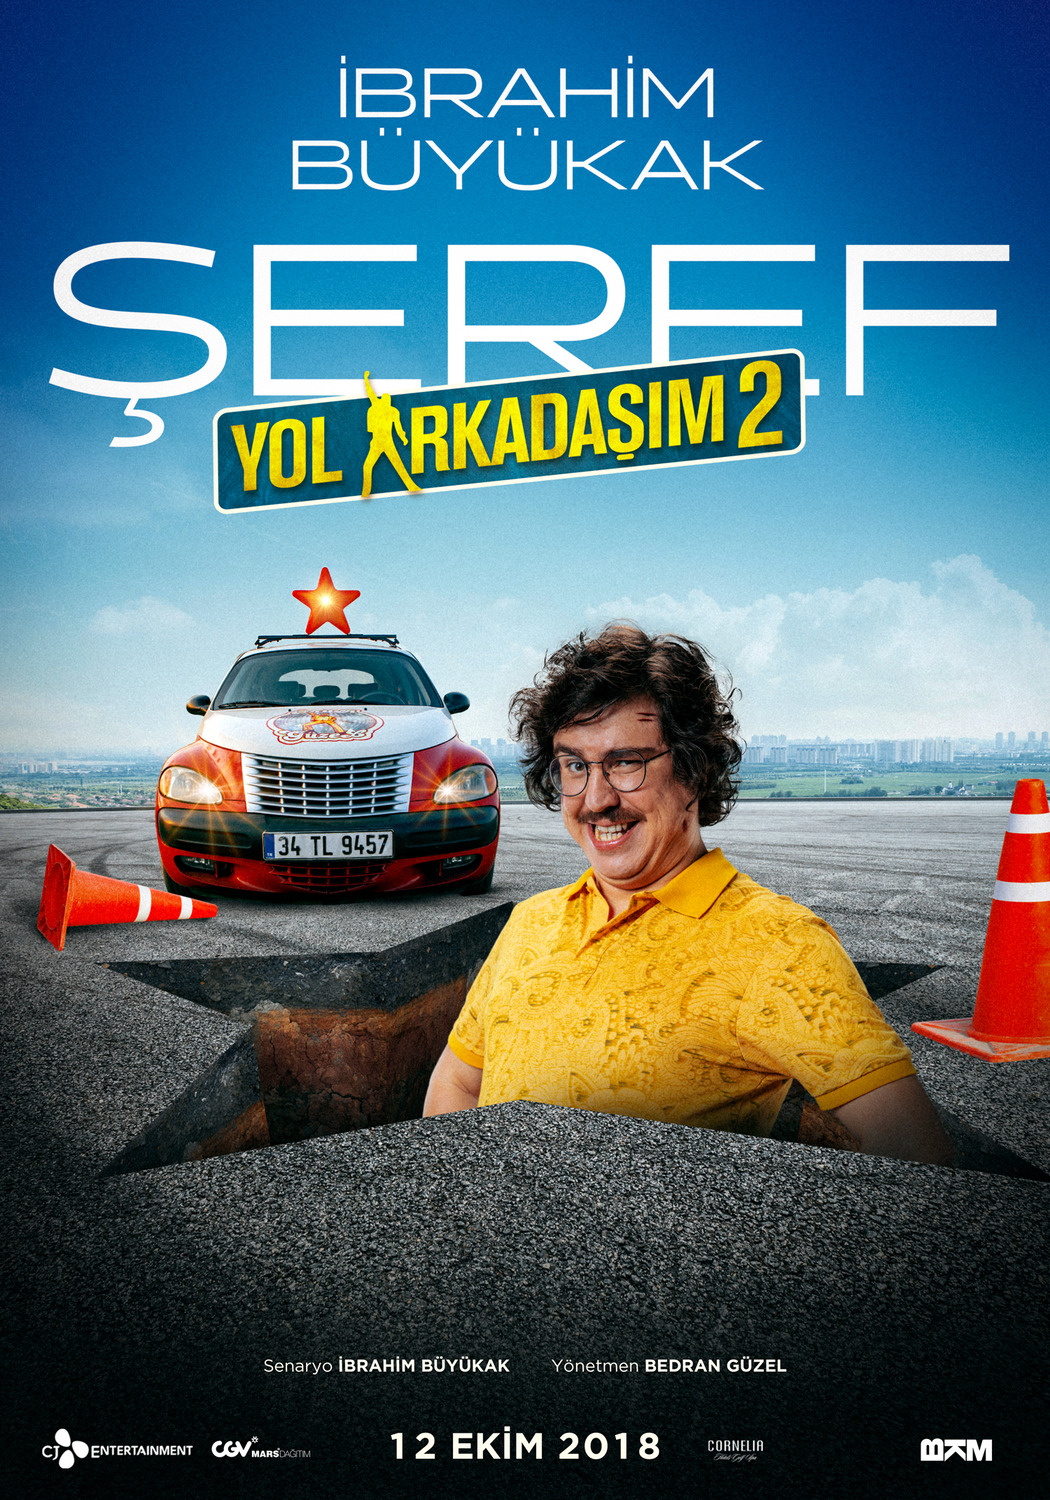 Extra Large Movie Poster Image for Yol Arkadasim 2 (#4 of 4)